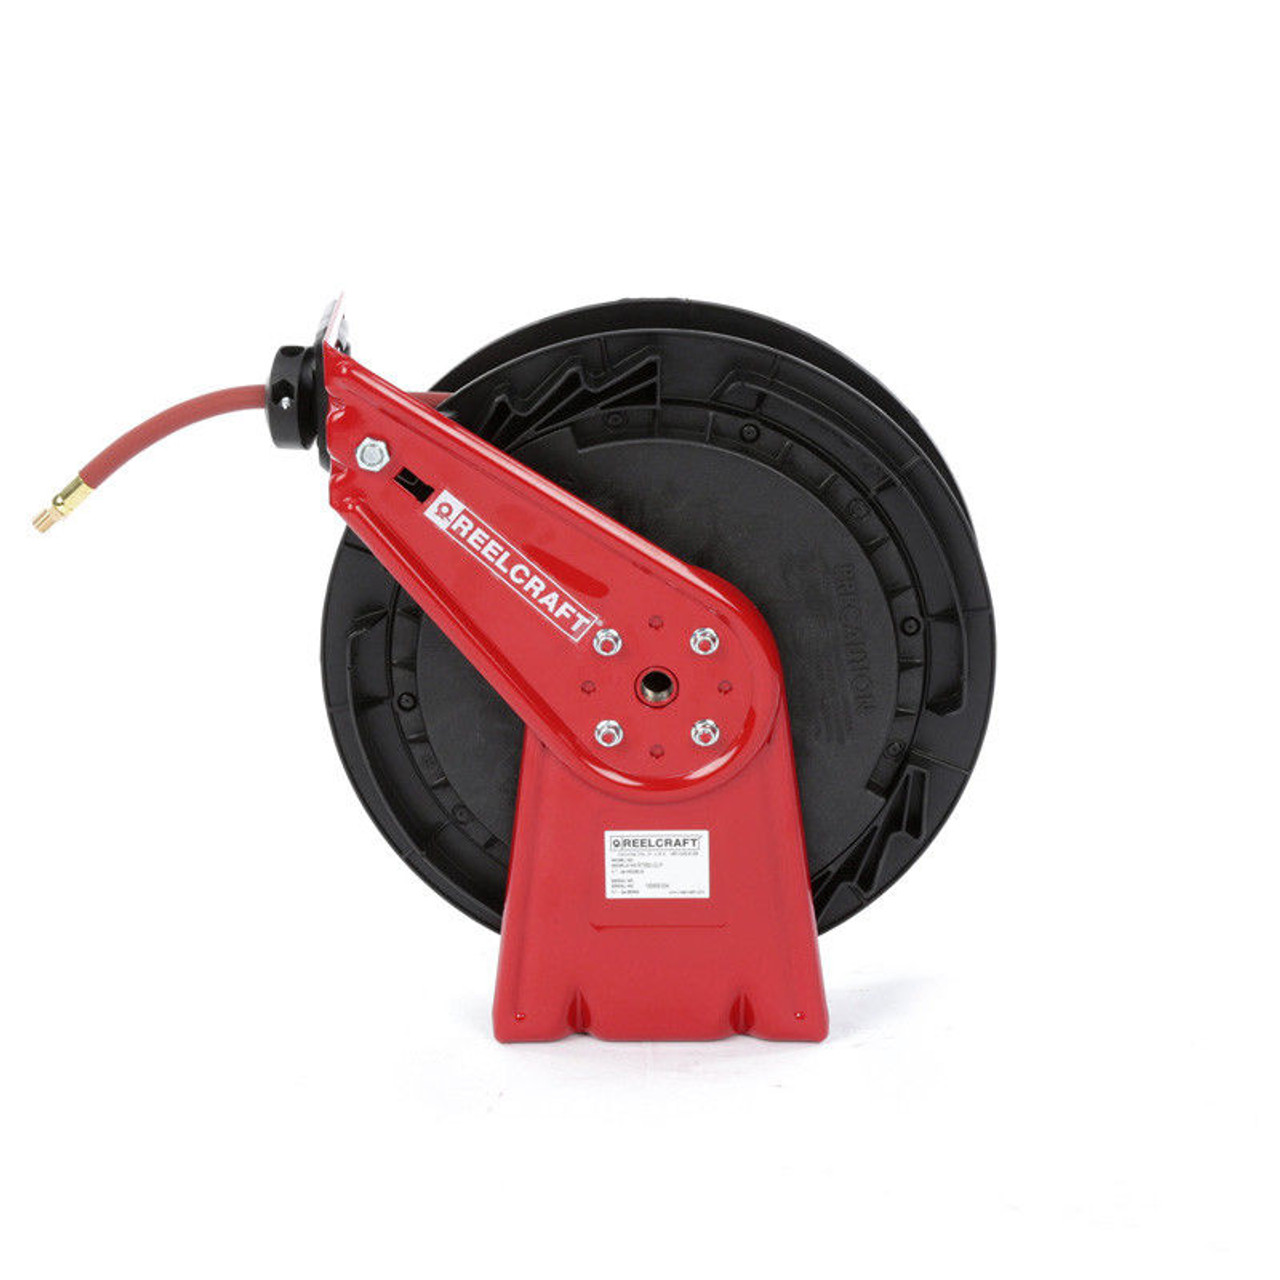 Reelcraft Dp7850 Olp Air/Water With Hose, 300 Psi Hose Reel, 1/2 X 50Ft Hose  Reel, 1/2 x 50ft